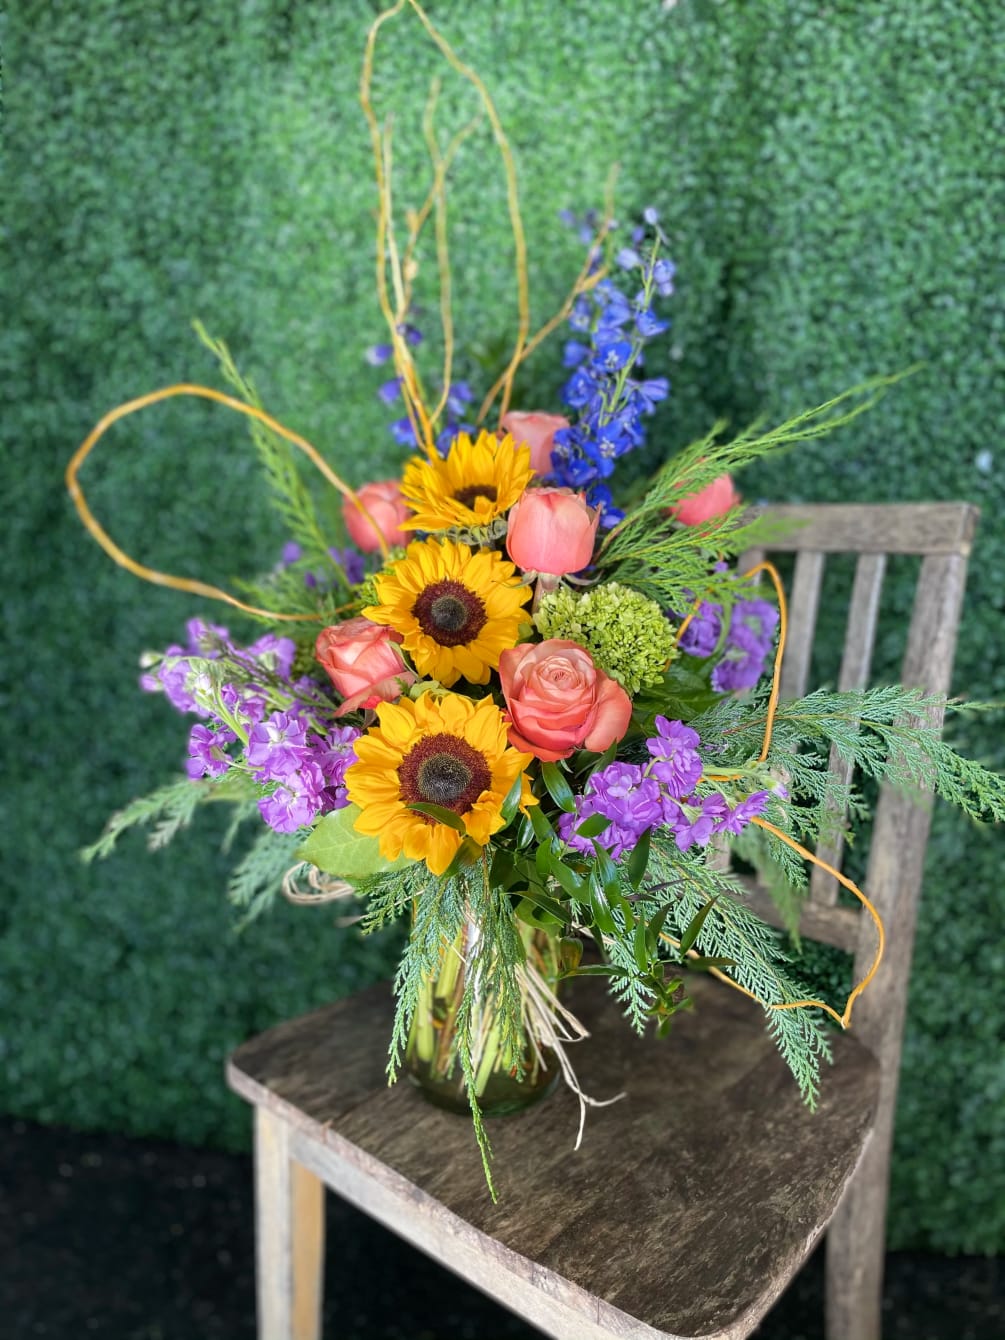 Toms River Florist  Flower Delivery by Narcissus Florals